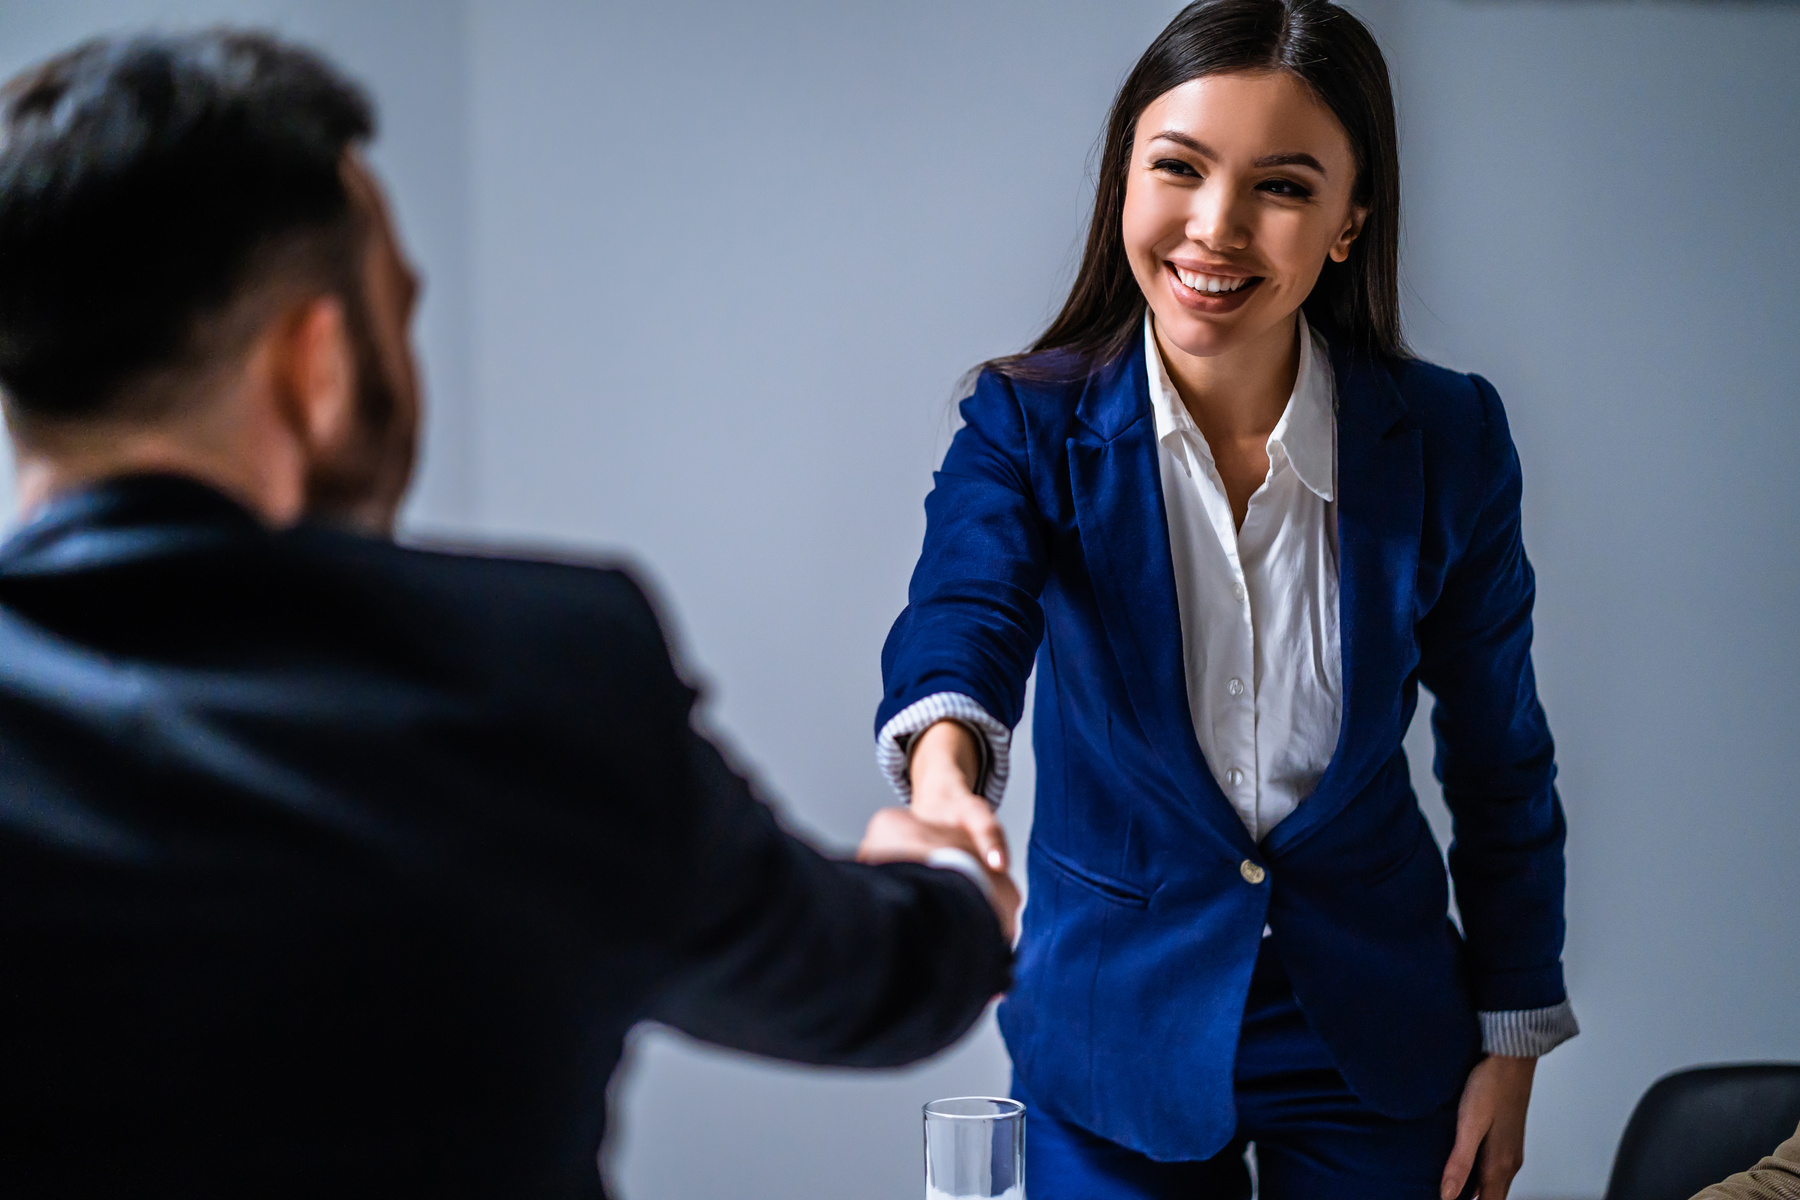 The business woman and man handshaking